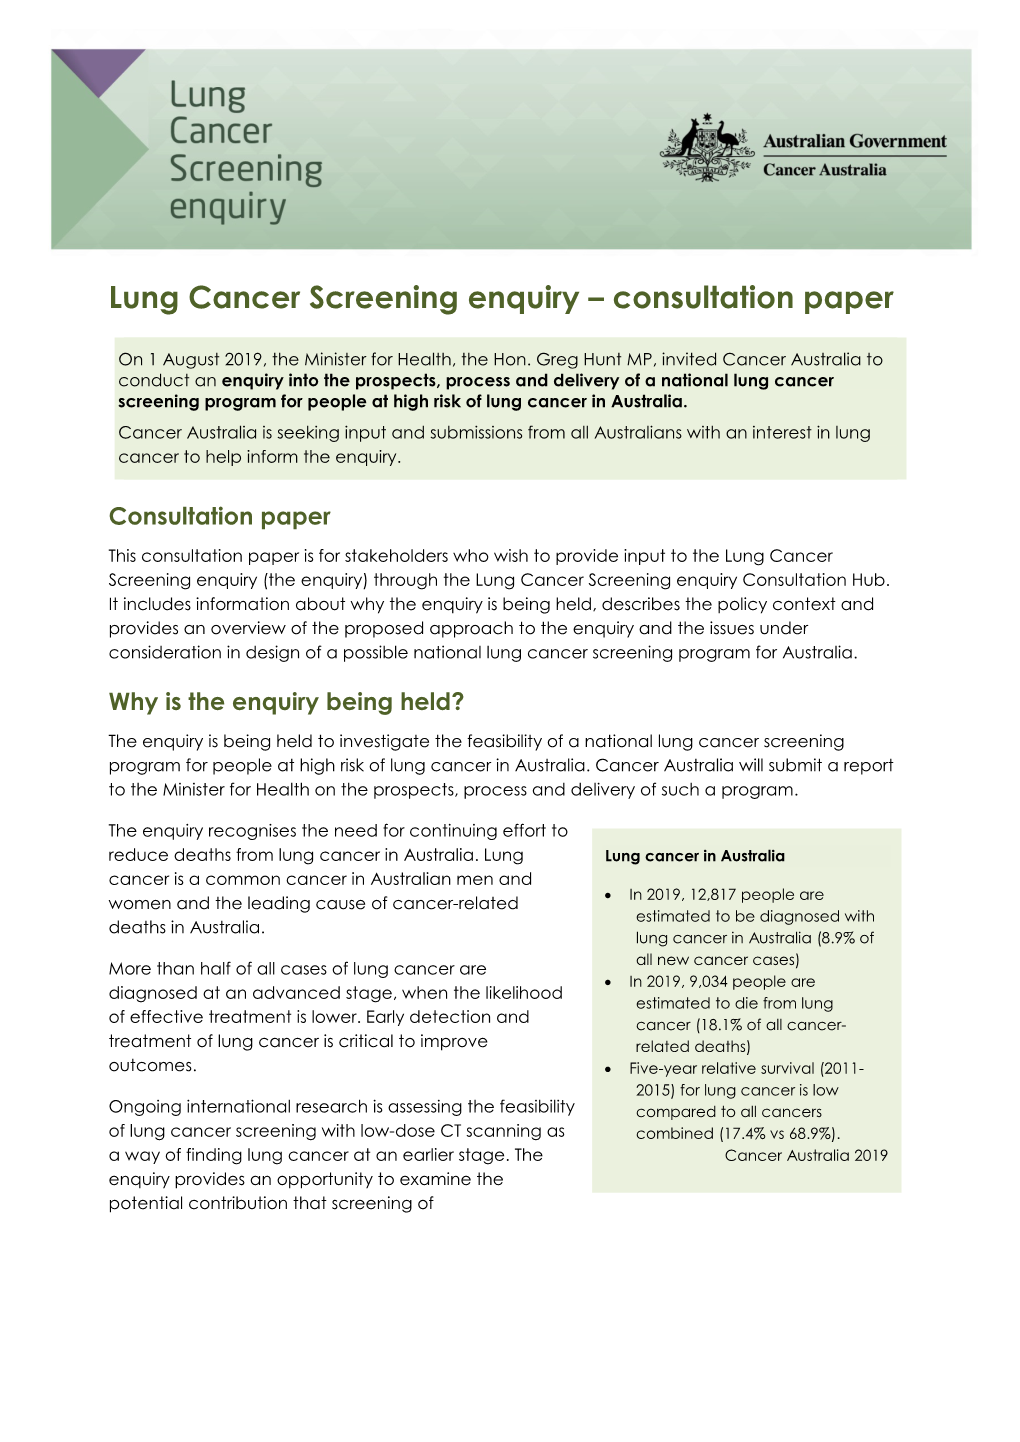 Lung Cancer Screening Enquiry – Consultation Paper